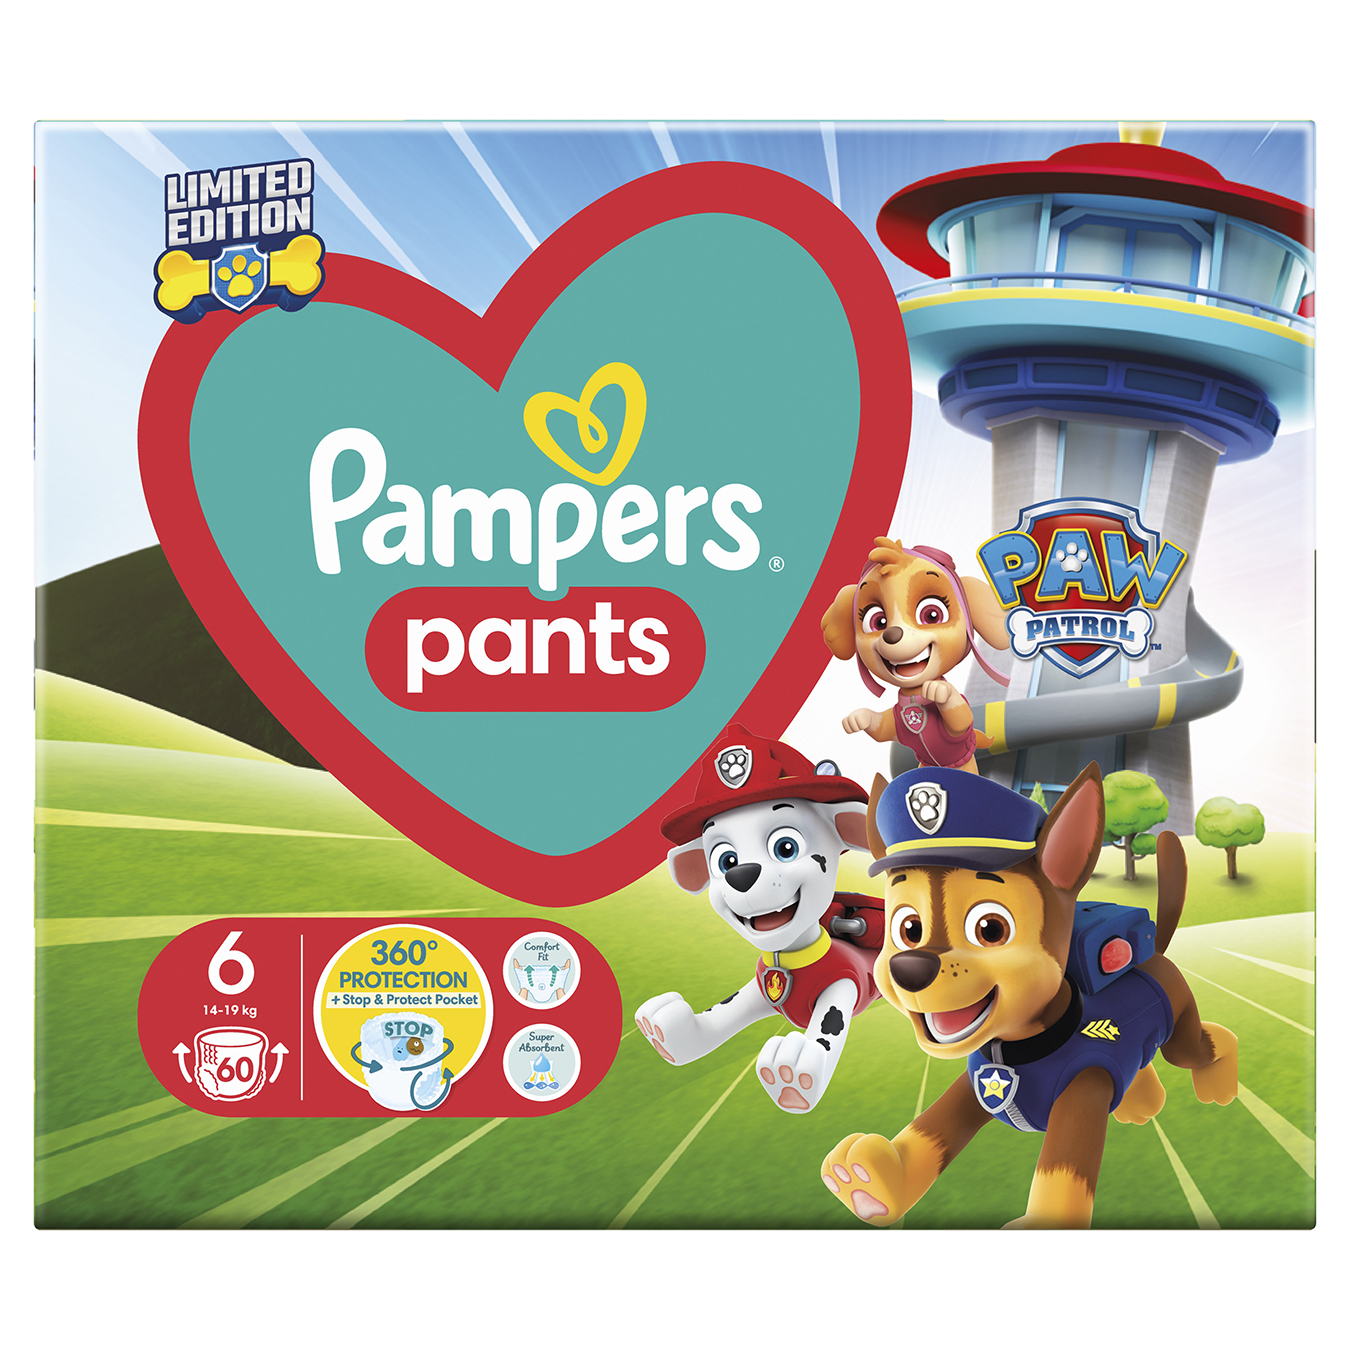 Diapers-panties Pampers paw patrol limedit children's disposable